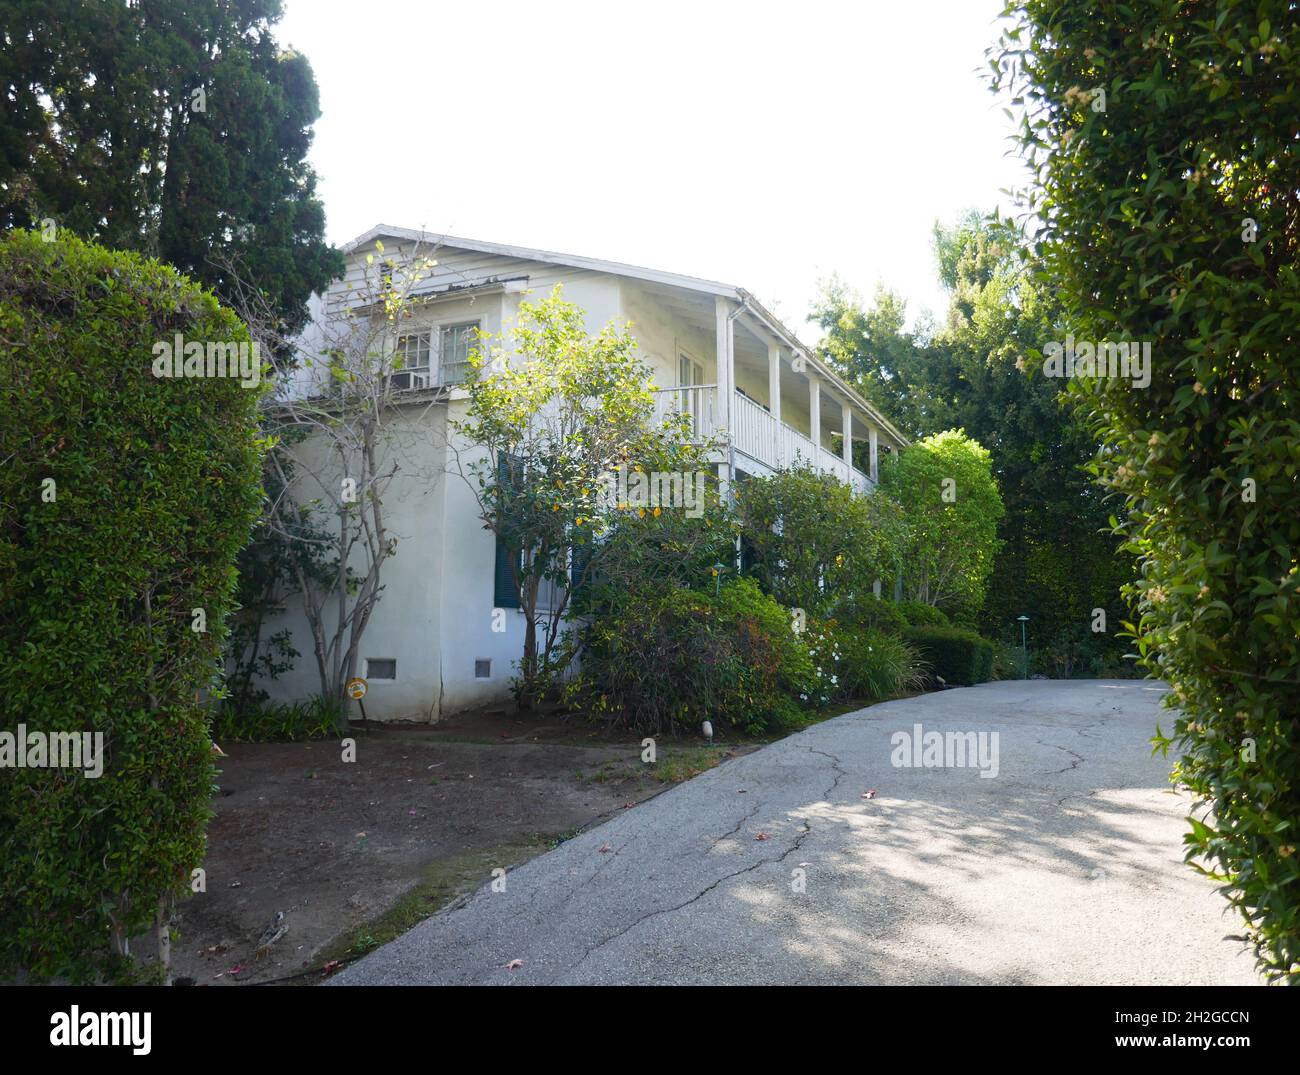 Beverly Hills, California, USA 9th September 2021 A general view of atmosphere of Comedian/Actor Gummo Marx's Former Home/house at 601 N. Beverly Drive on September 9, 2021 in Beverly Hills, California, USA. Photo by Barry King/Alamy Stock Photo Stock Photo